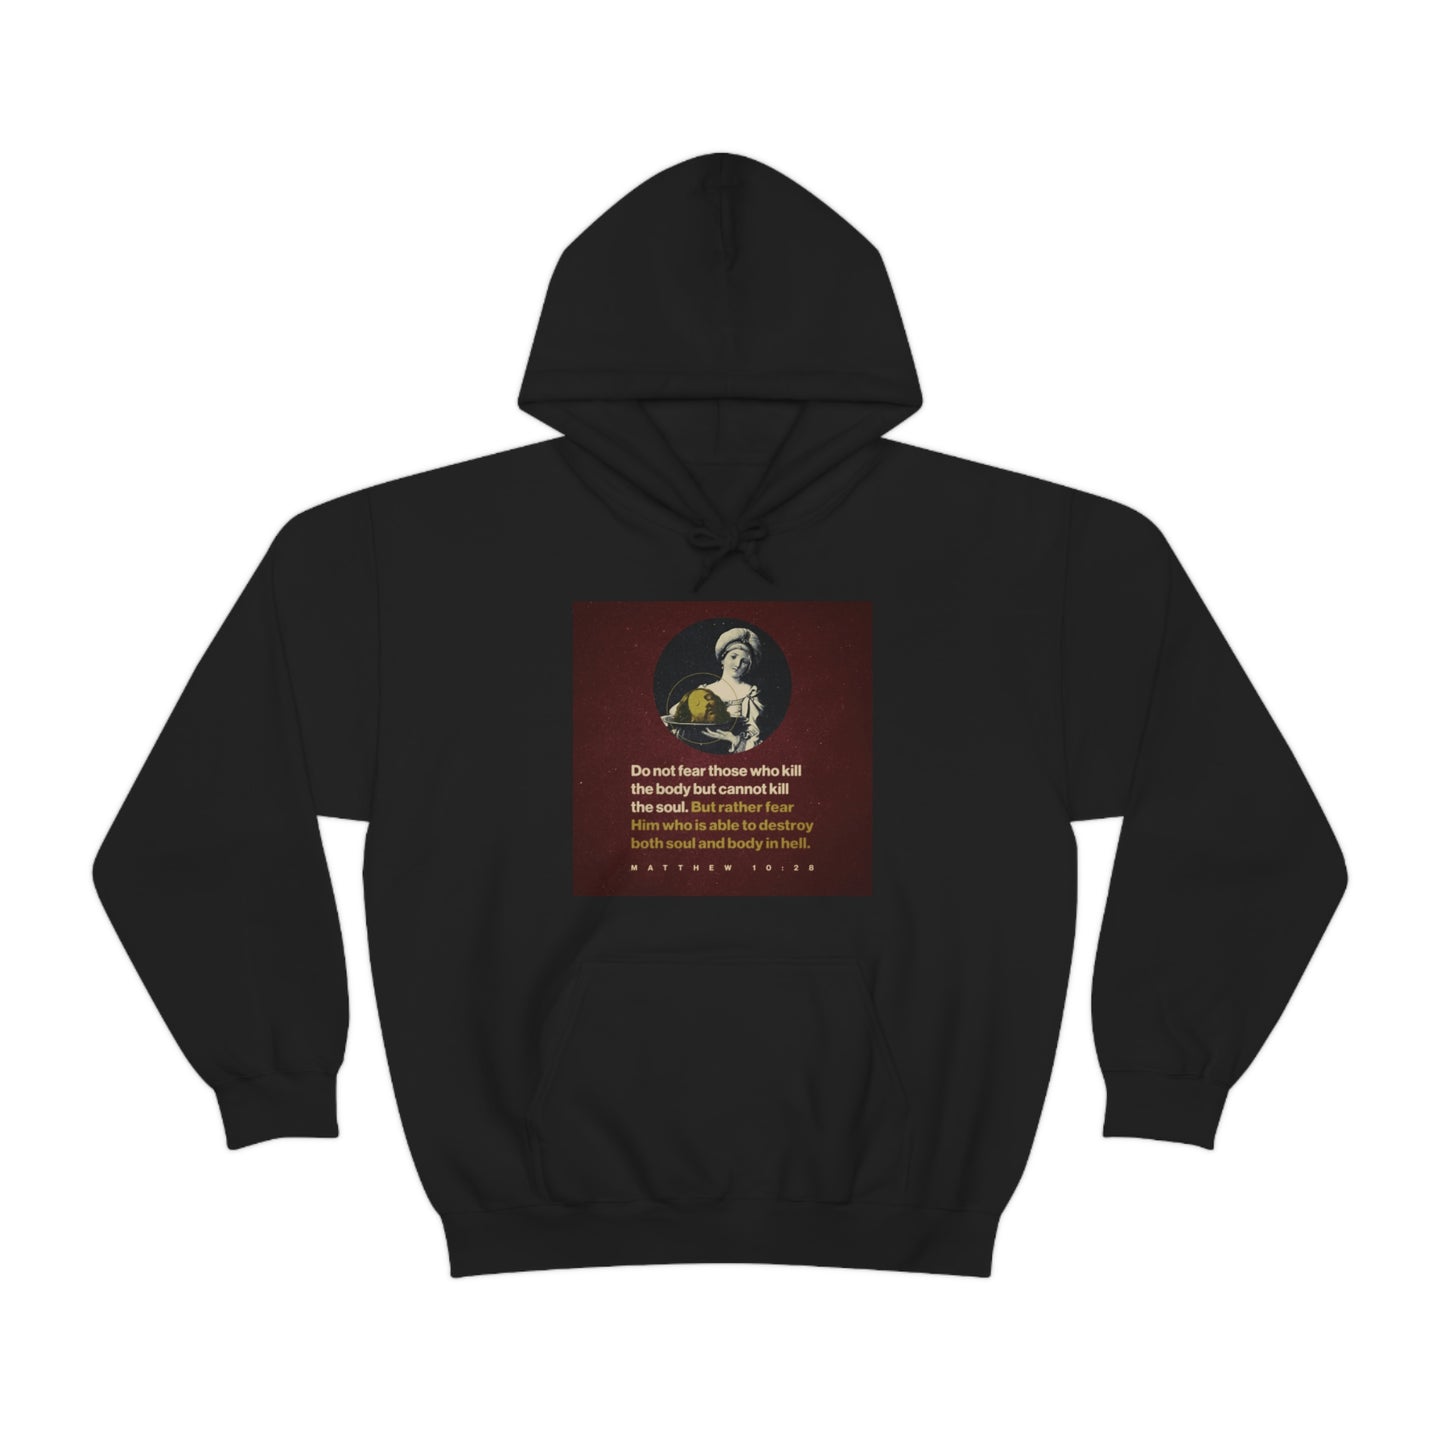 Do Not Fear Those Who Kill the Body No. 1 | Orthodox Christian Double-Sided Hoodie / Hooded Sweatshirt